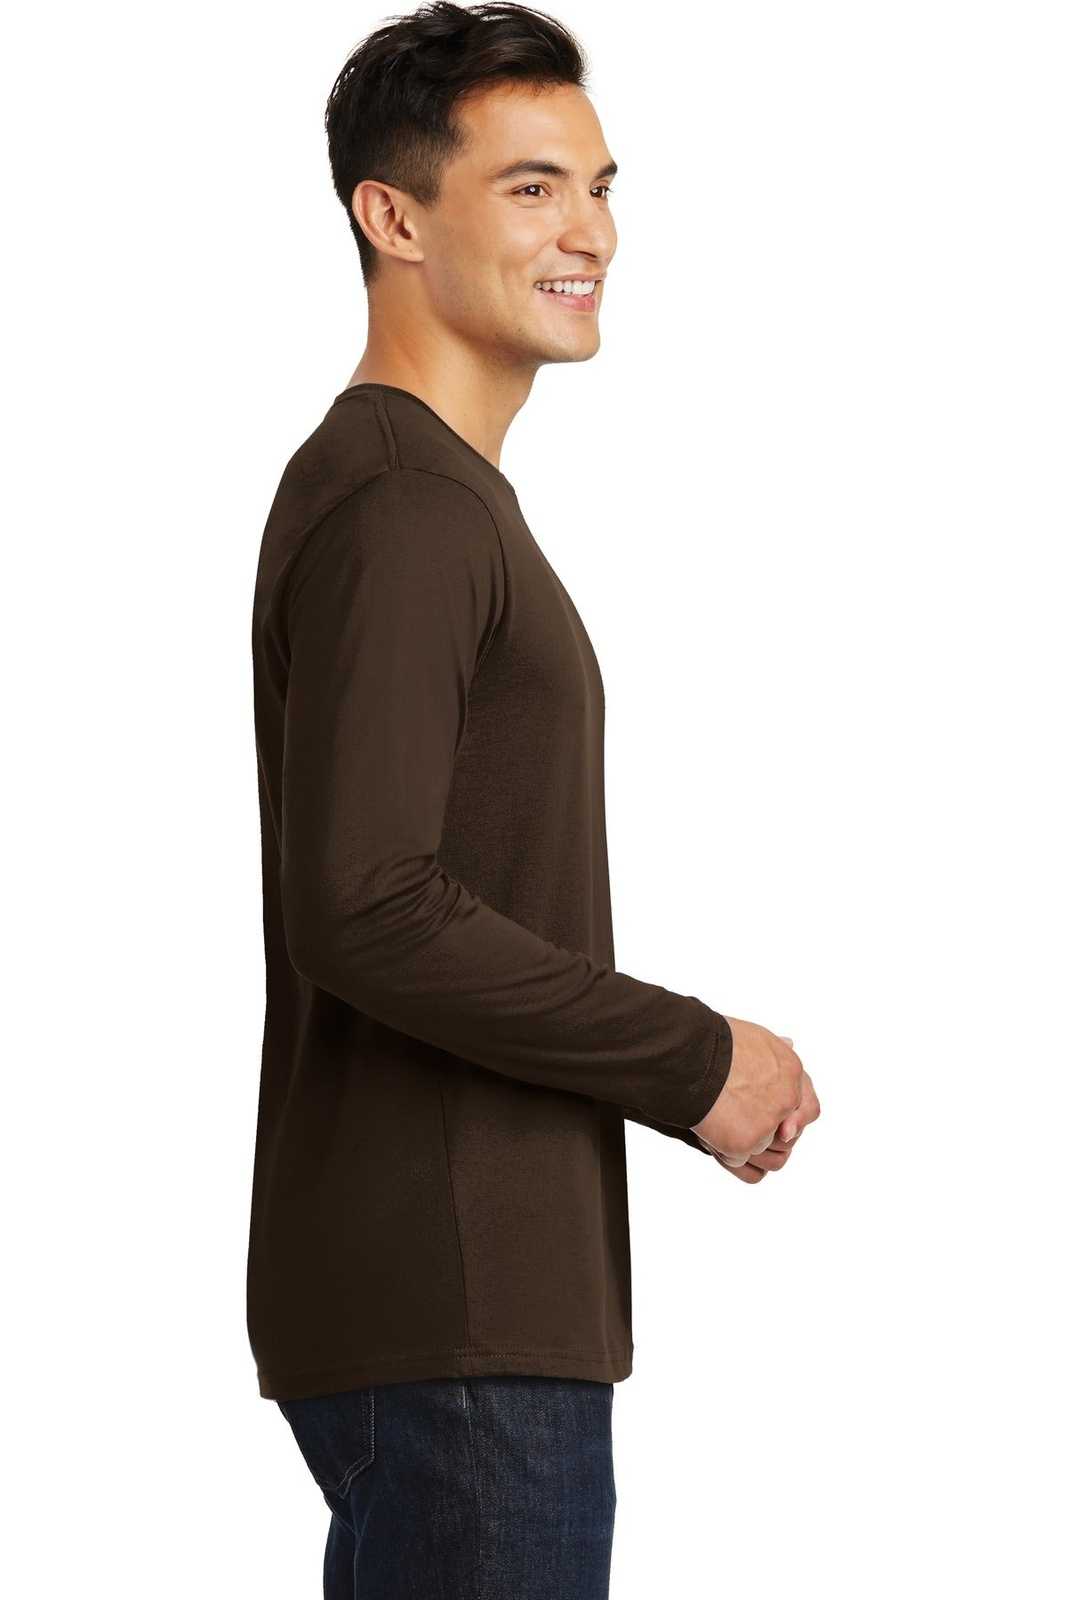 District DT105 Perfect Weight Long Sleeve Tee - Espresso - HIT a Double - 3